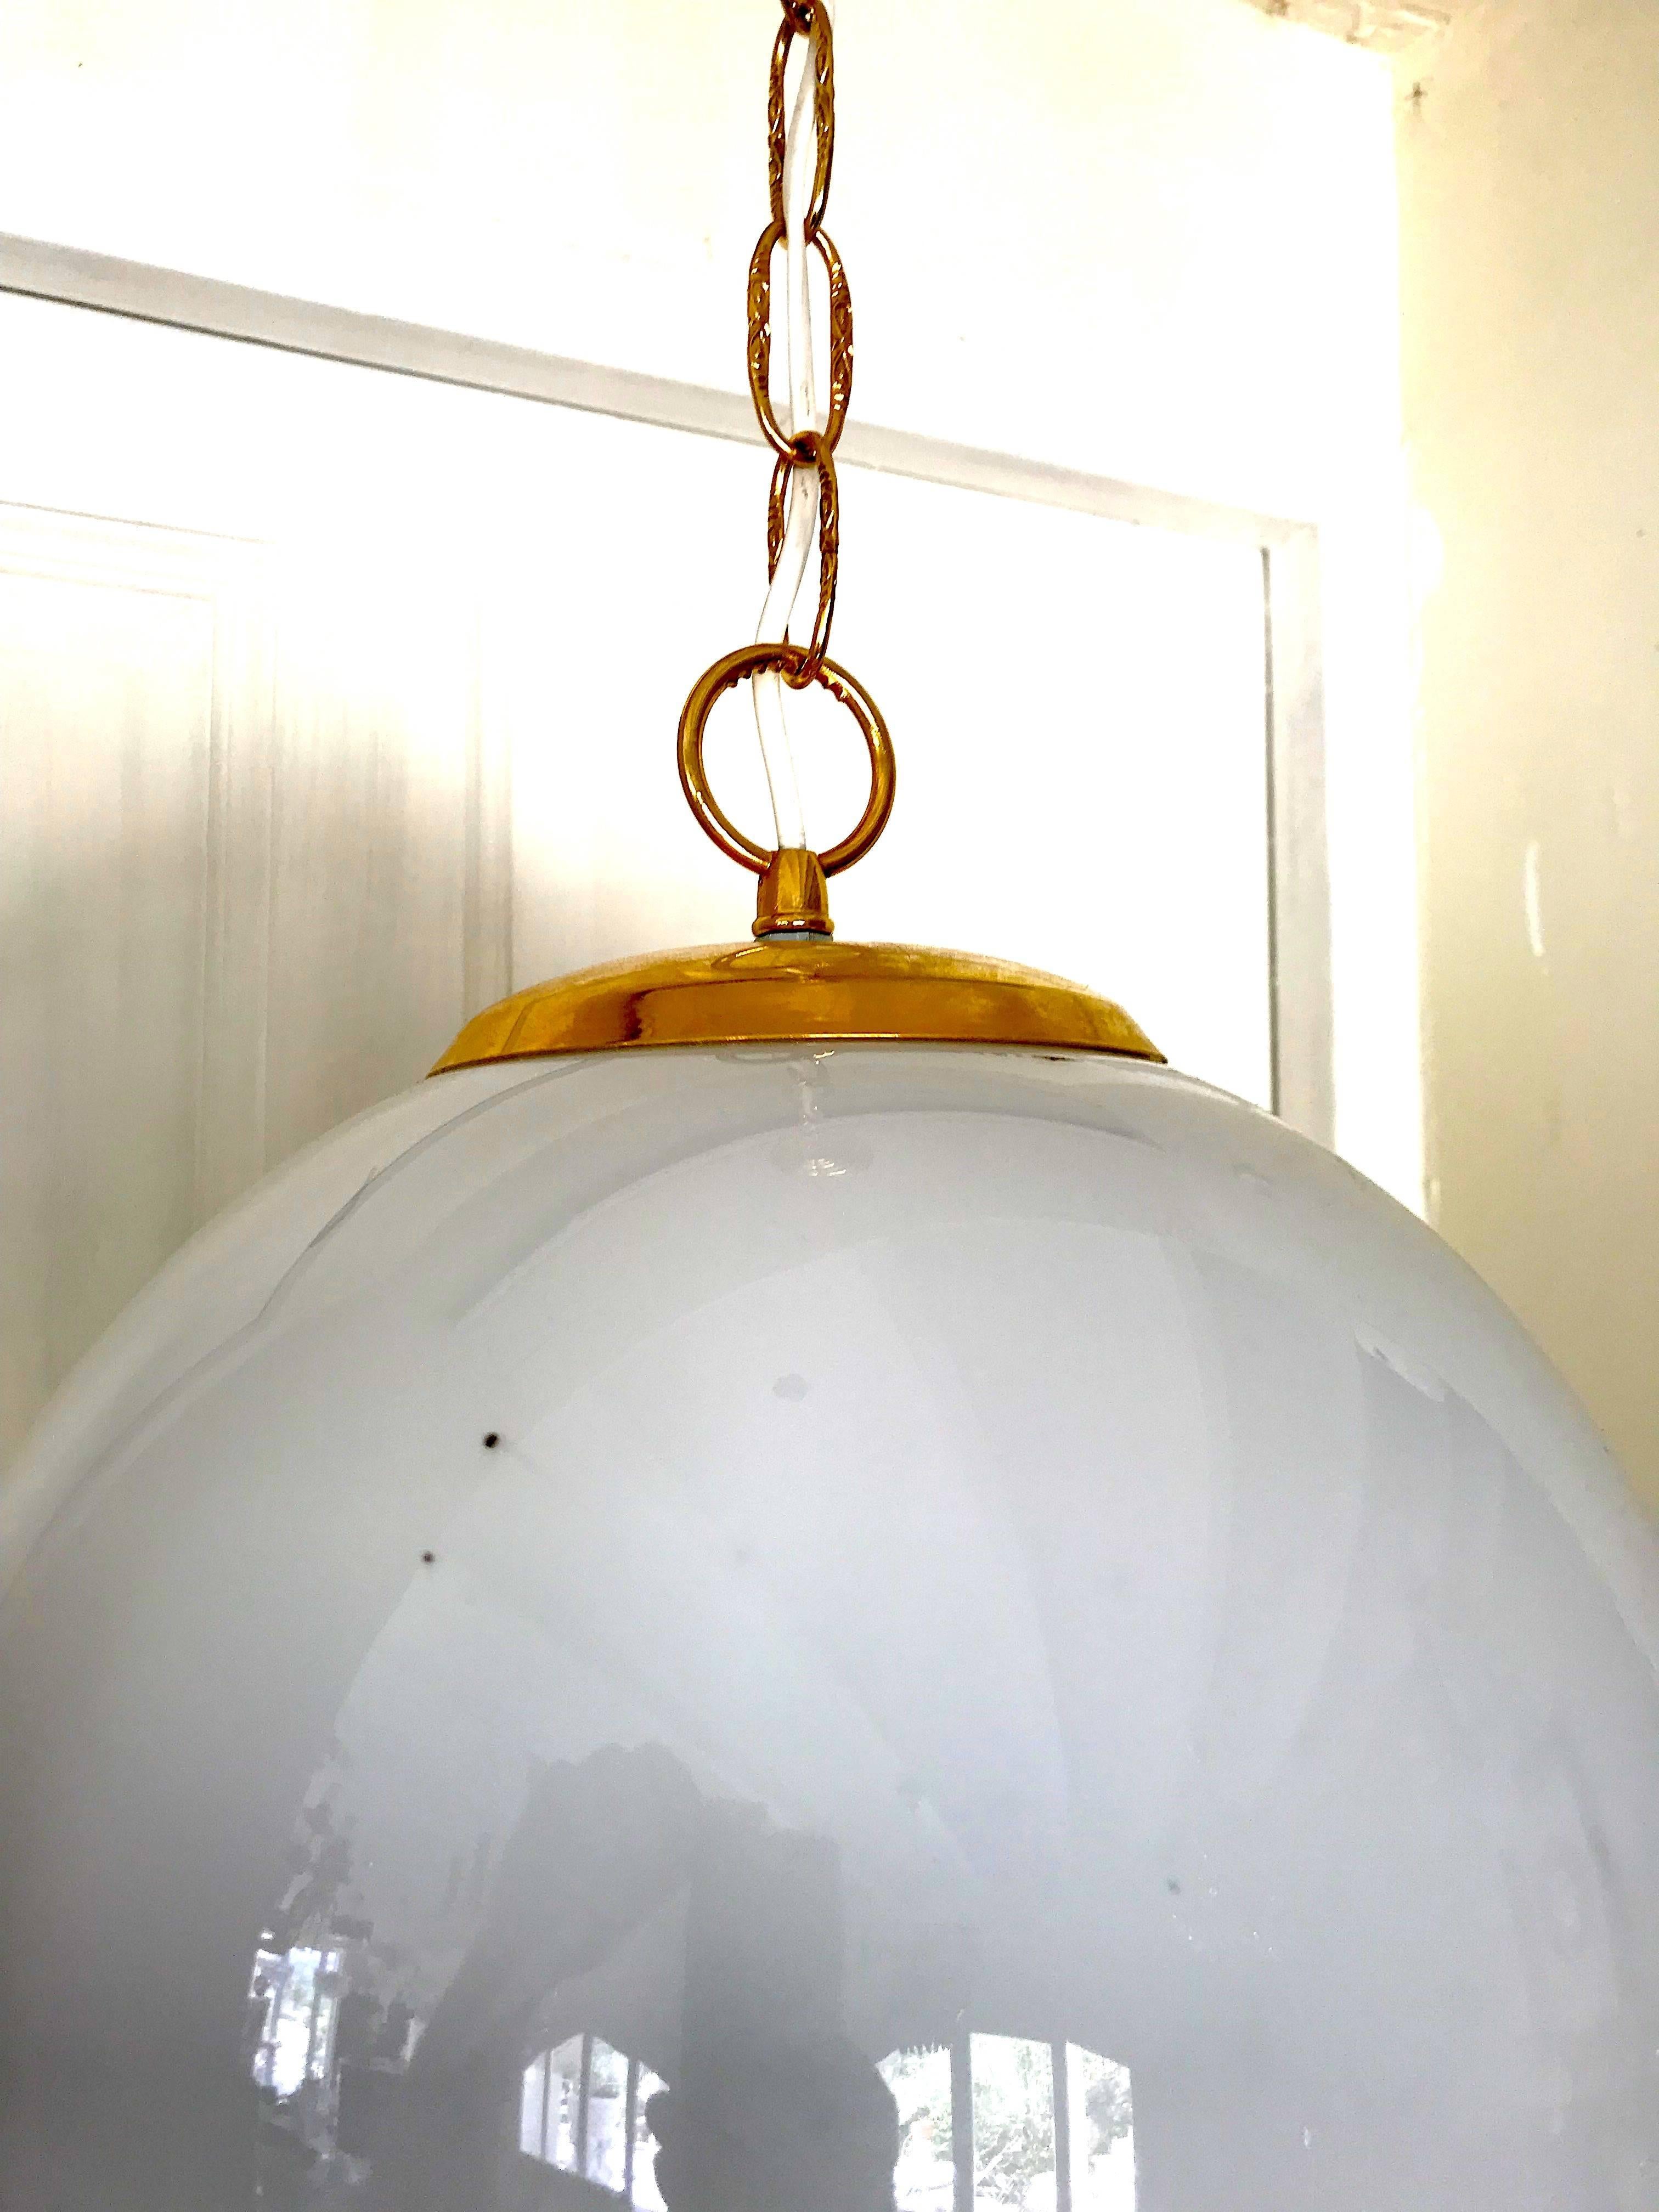 A midcentury handblown Murano globe of white glass with all-over internal bubbles with an undulating double helix of amber and black, the fixture suspended by a chrome original chain. Measures: 30 cm.
A real stunning ORIGINAL vintage period lamp !!